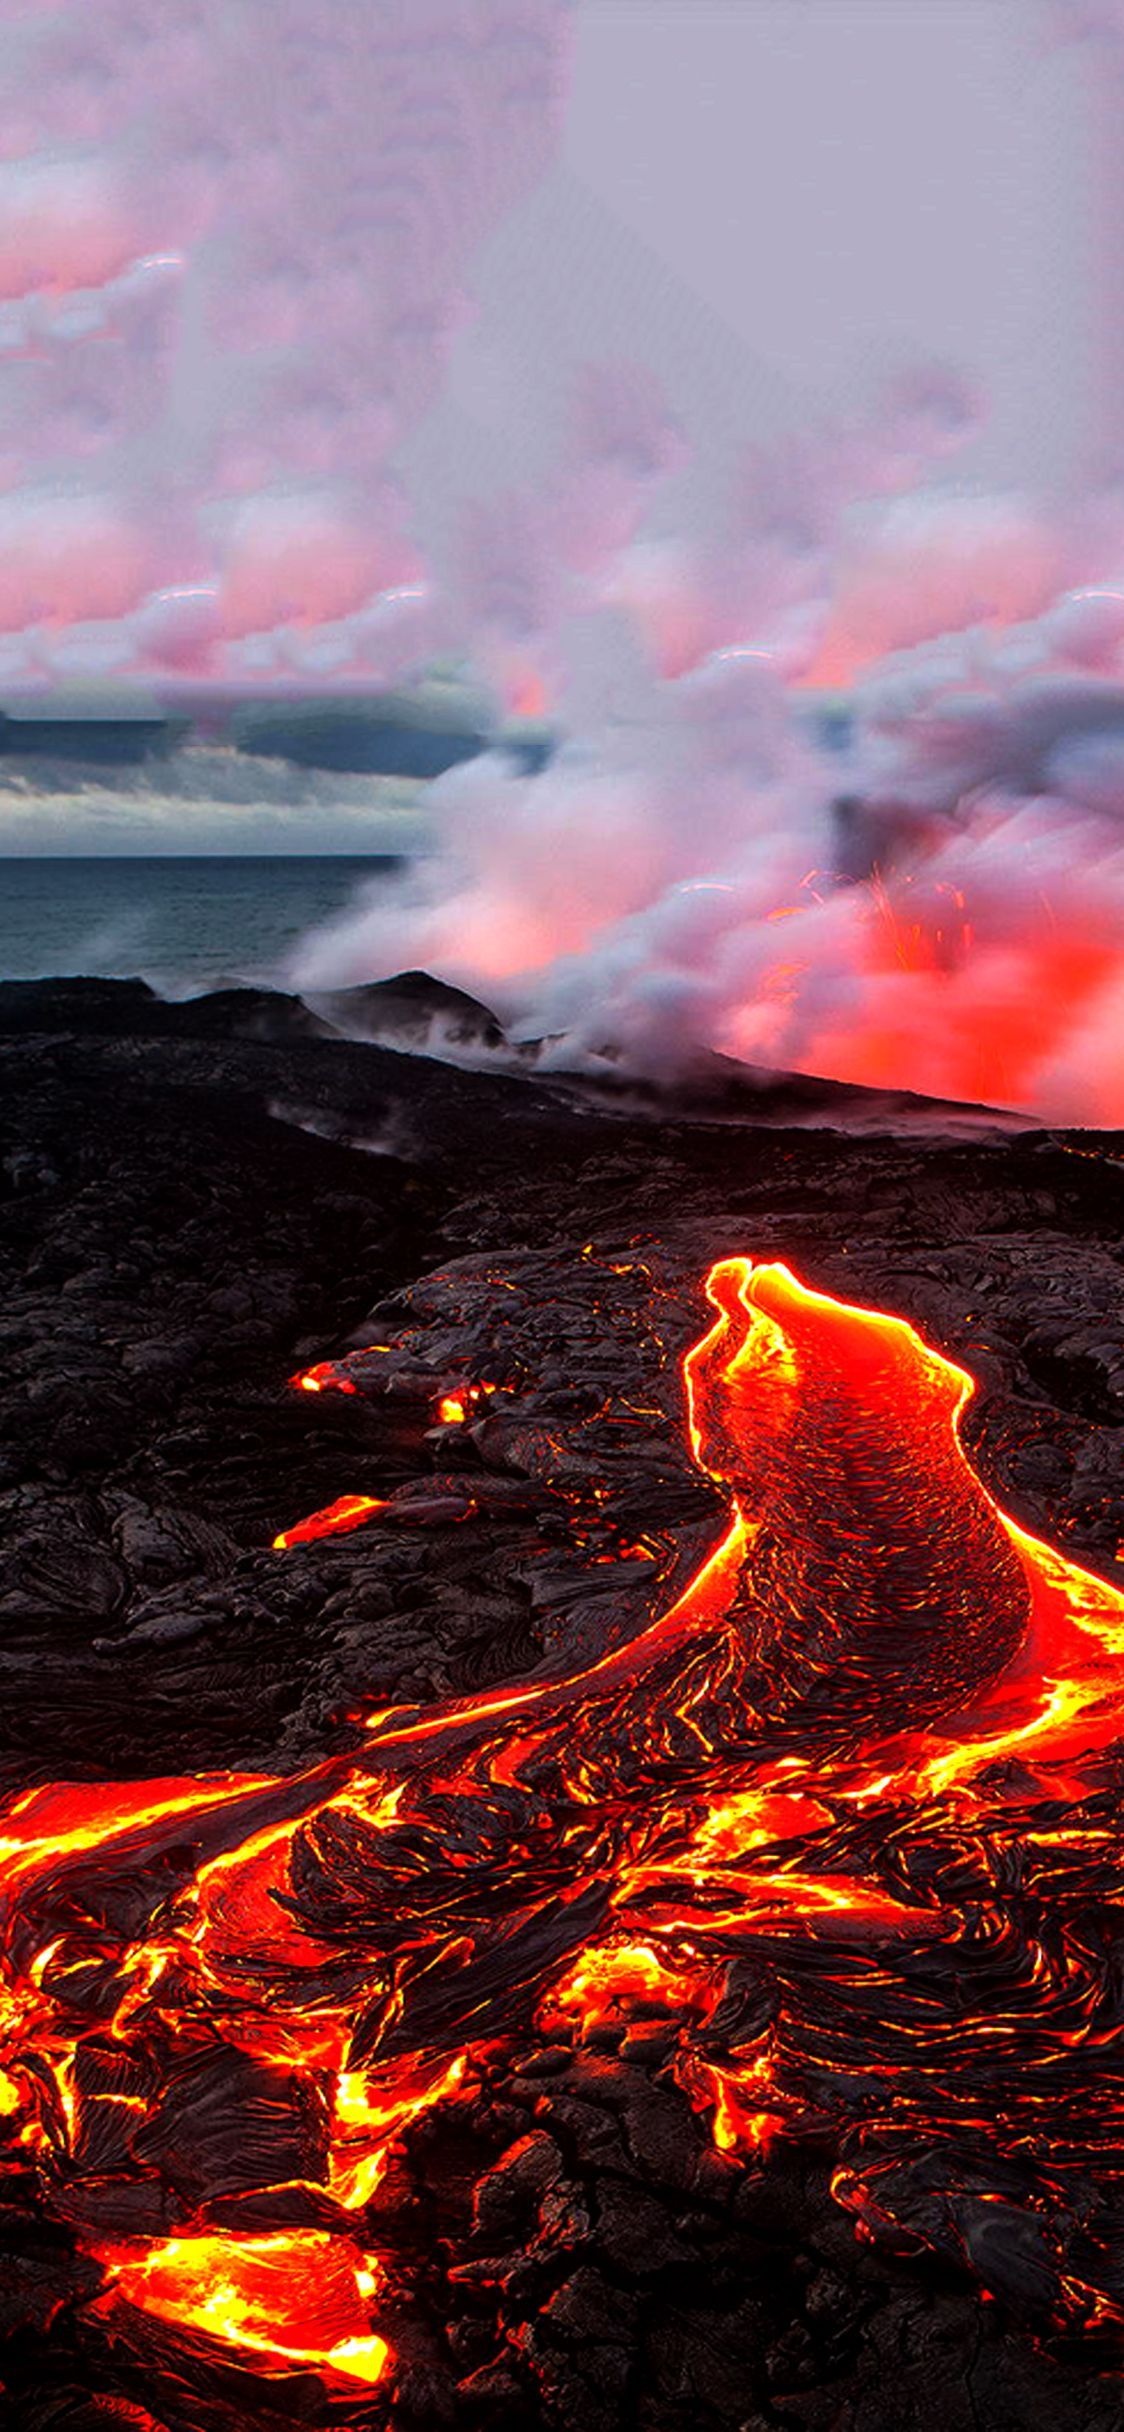 Volcano 4K wallpapers, John Sellers collection, High-resolution images, Spectacular eruptions, 1130x2440 HD Handy